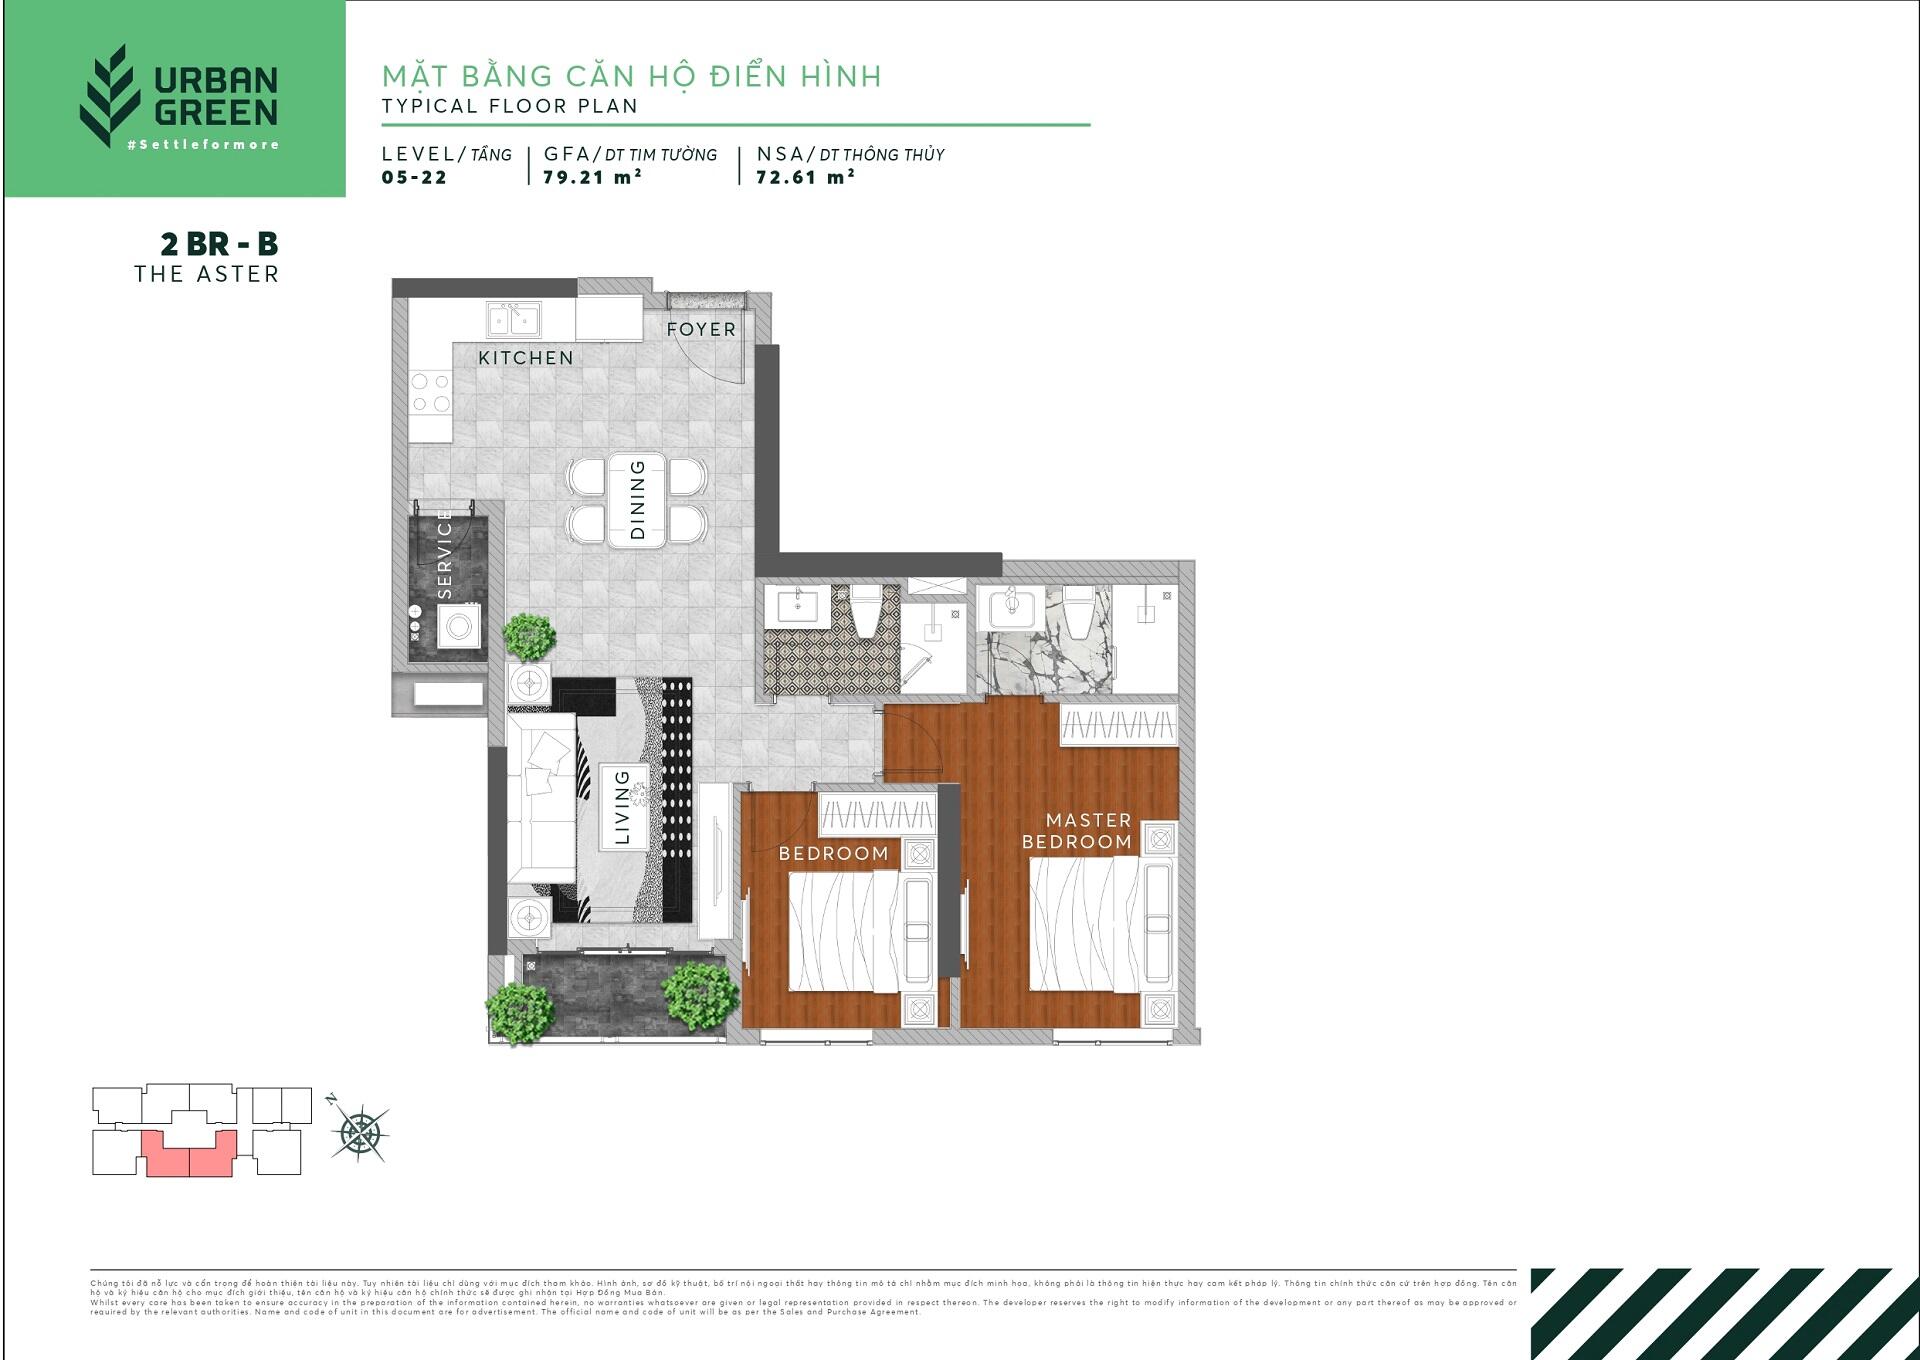 Floor plan of The Aster apartment 2 bedrooms 2BR - B